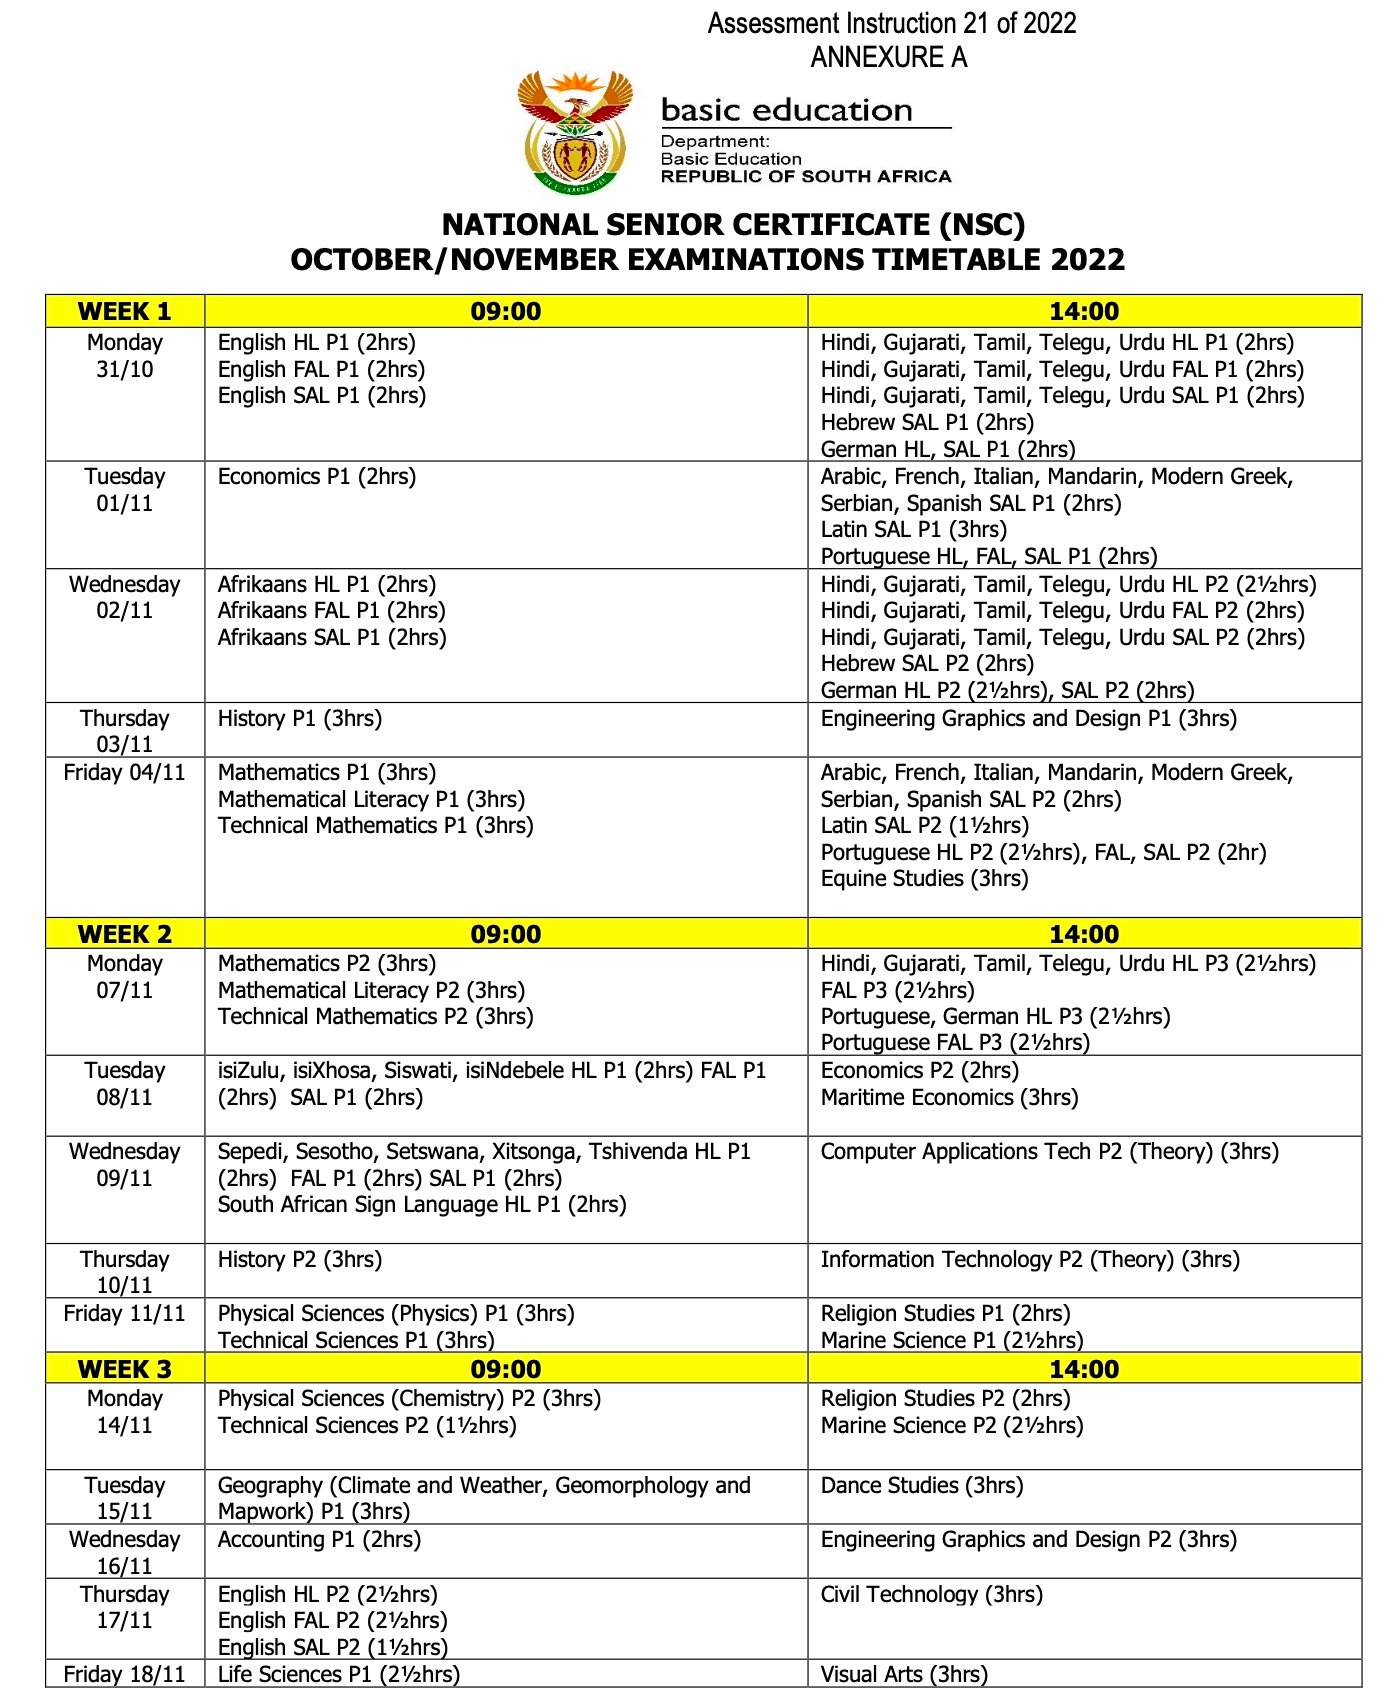 Grade 12 Final Exam Timetable 2022 October/November is out